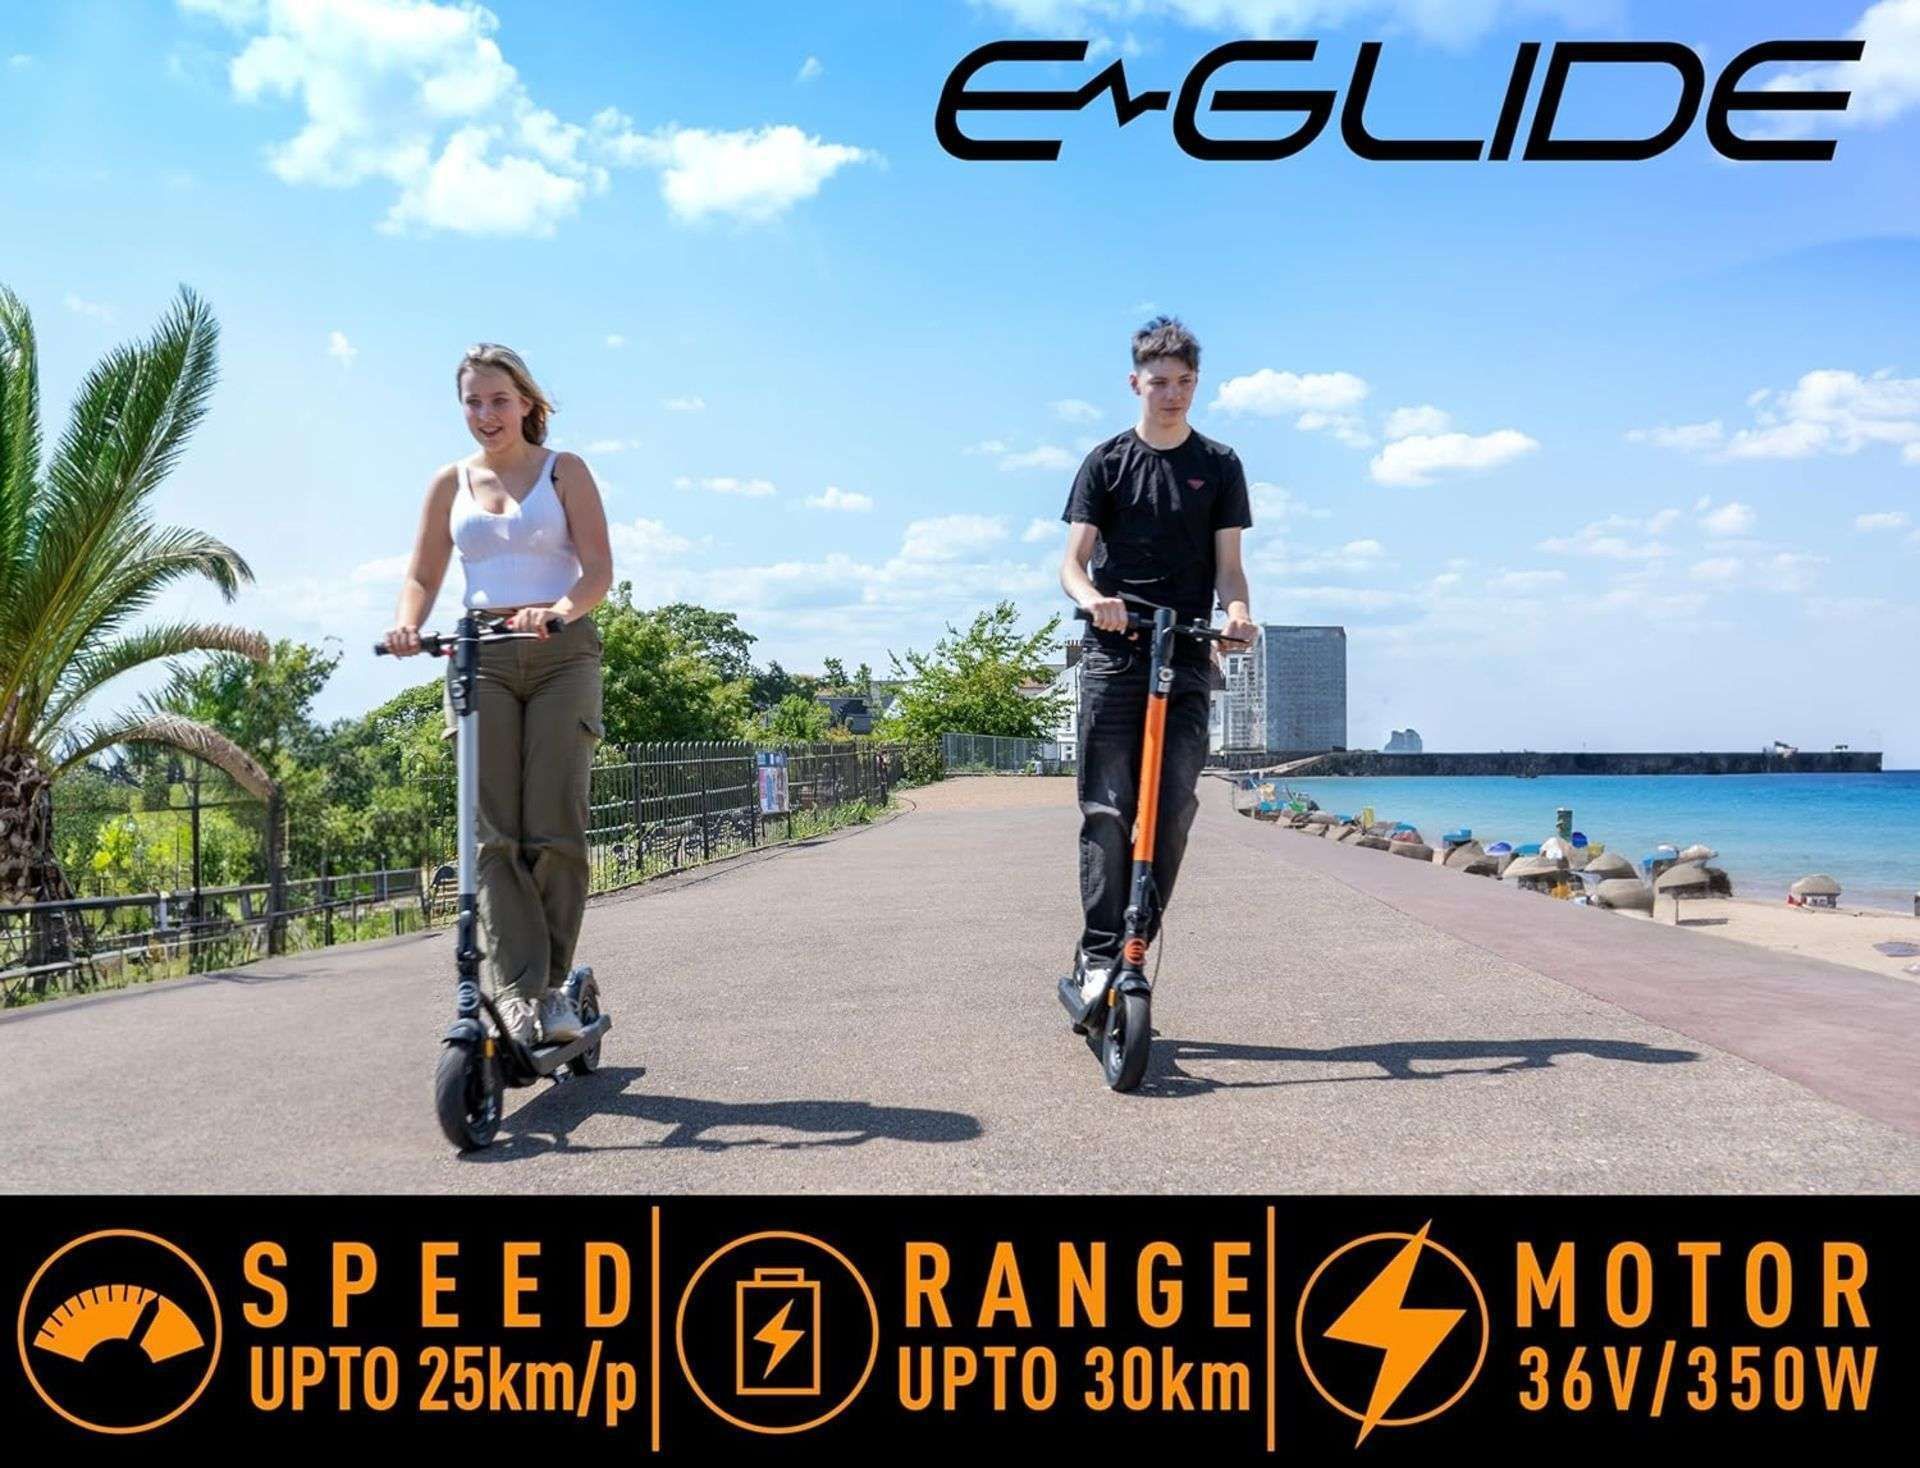 Brand New E-Glide V2 Electric Scooter Grey and Black RRP £599, Introducing a sleek and efficient - Bild 3 aus 5